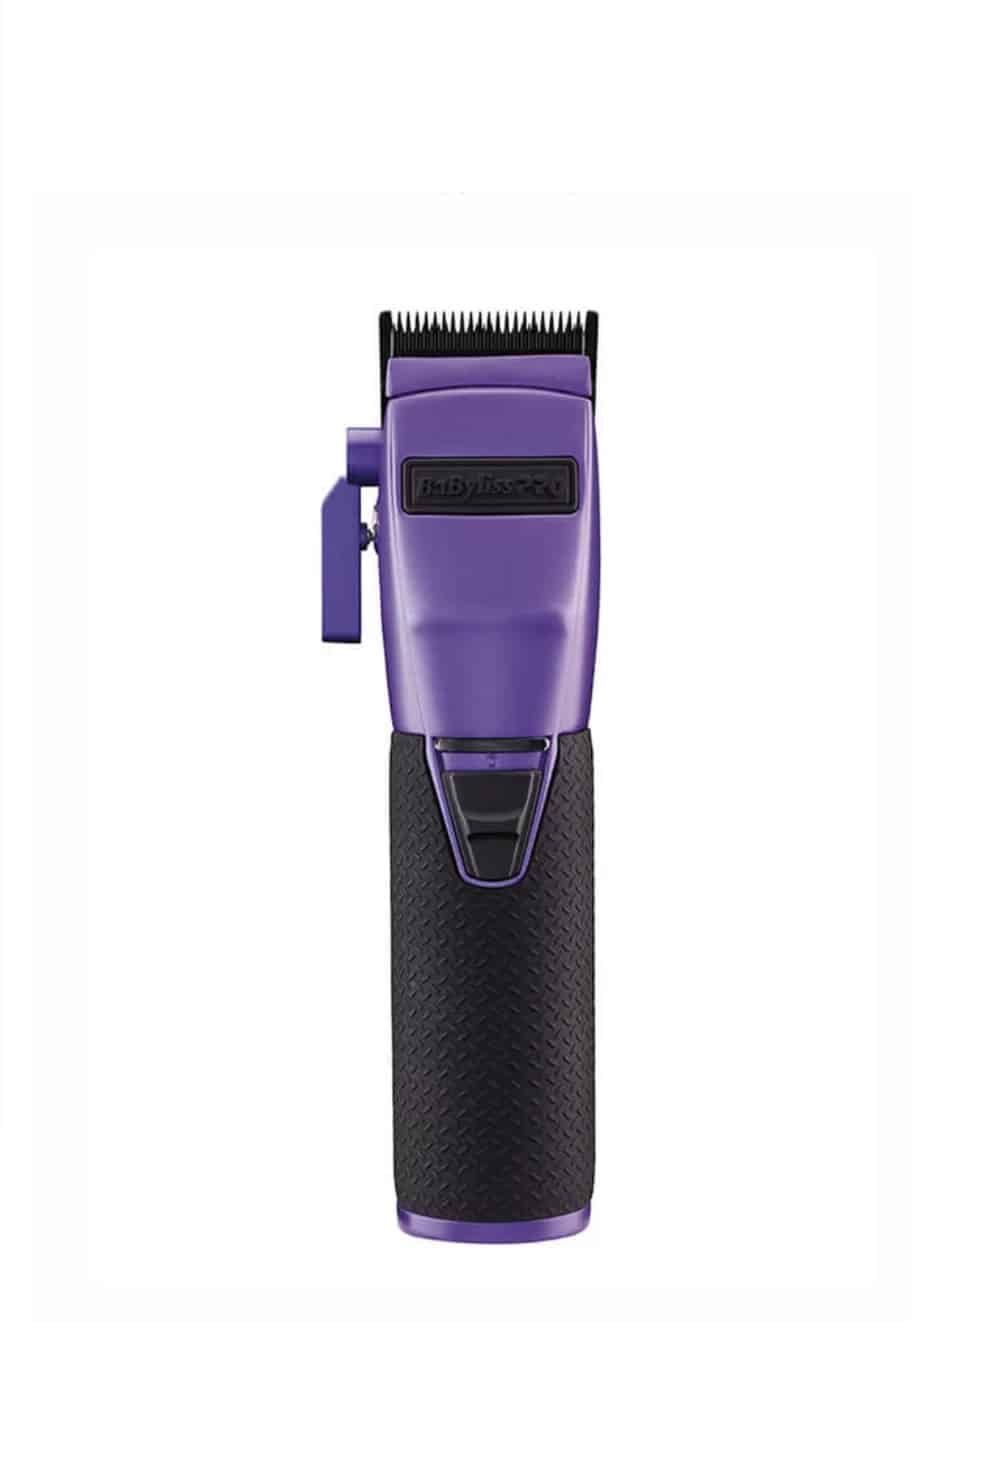 BaBylissPRO Barberology - Clippers, Trimmers, Double Foil Shavers